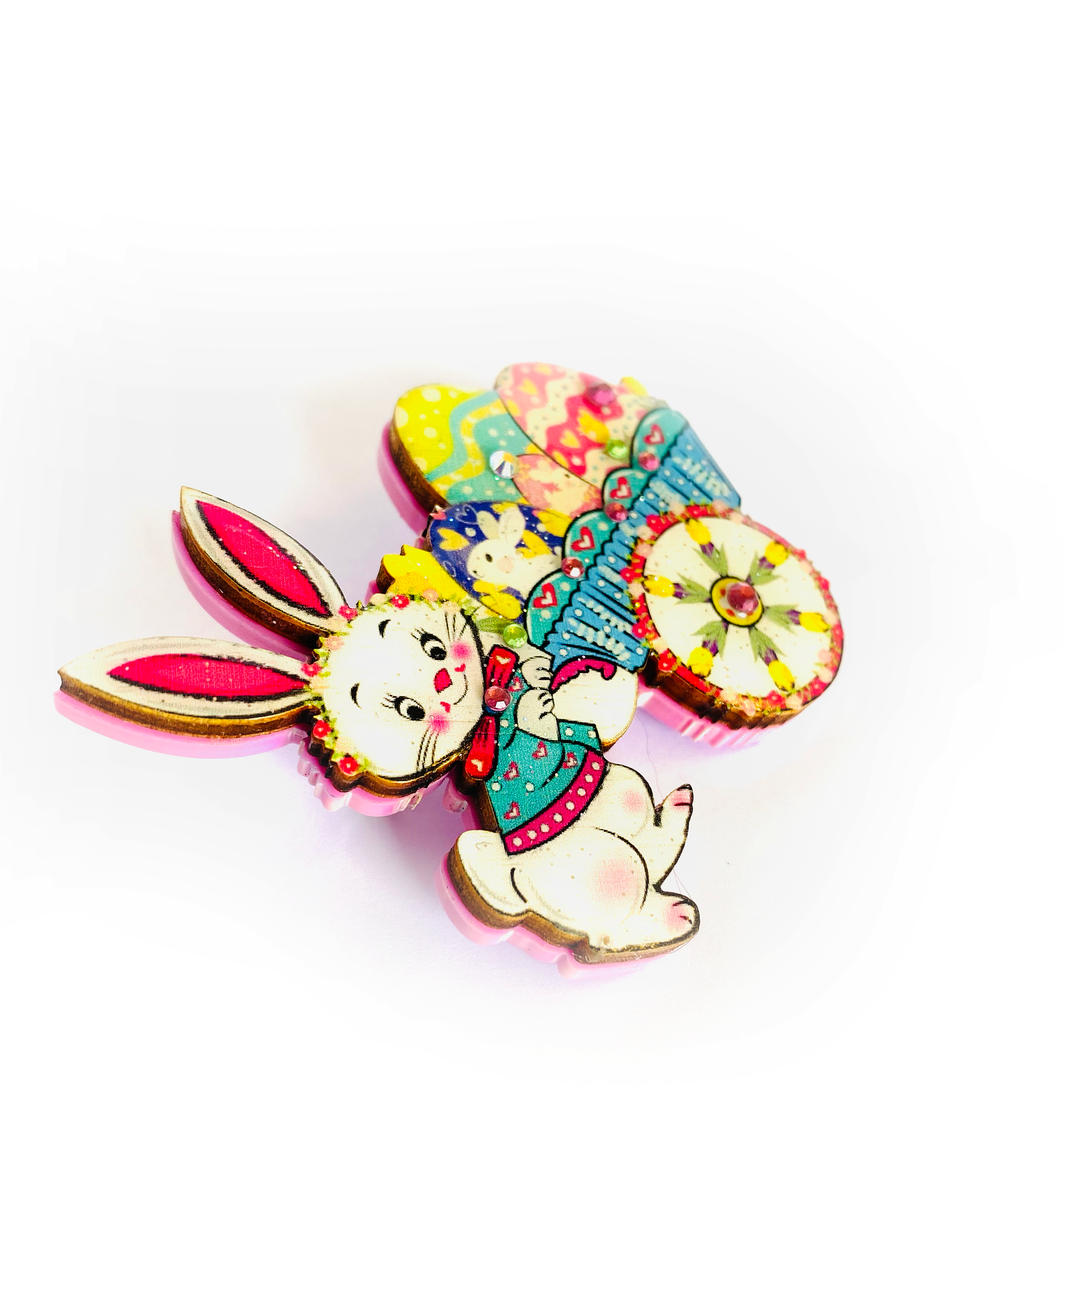 Benny Bunny and his Easter Egg Cart Brooch by Rosie Rose Parker